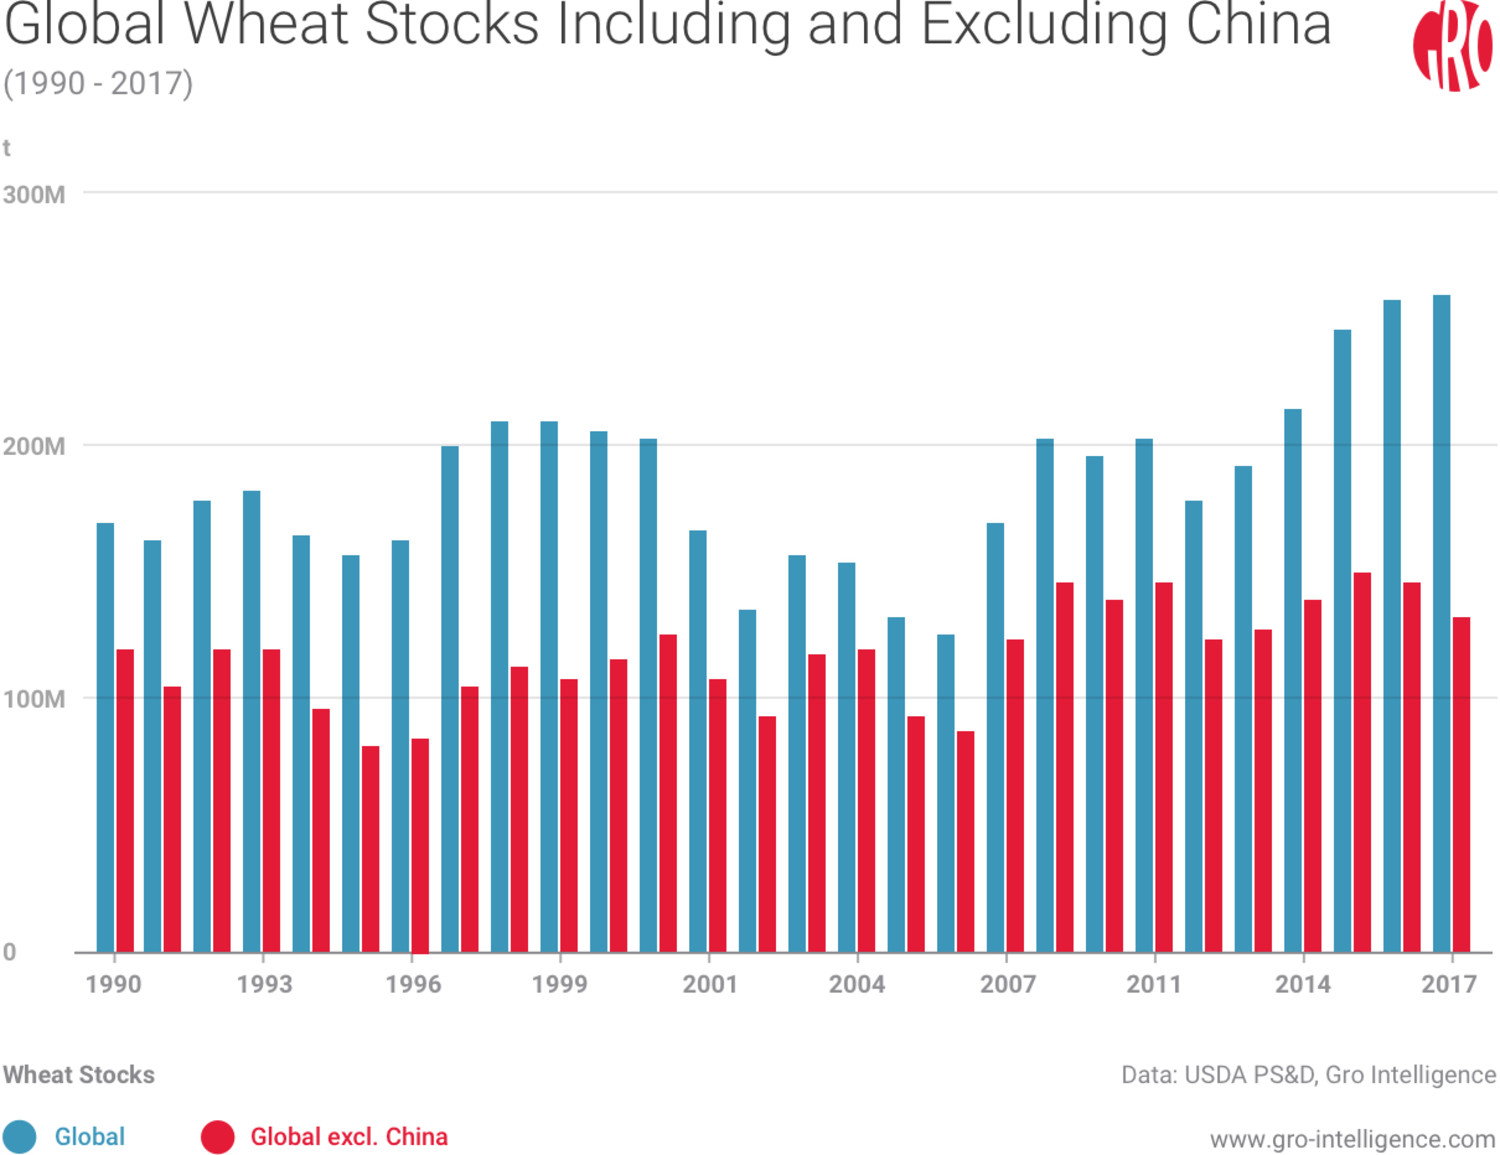 Global Wheat Stocks Including and Excluding China